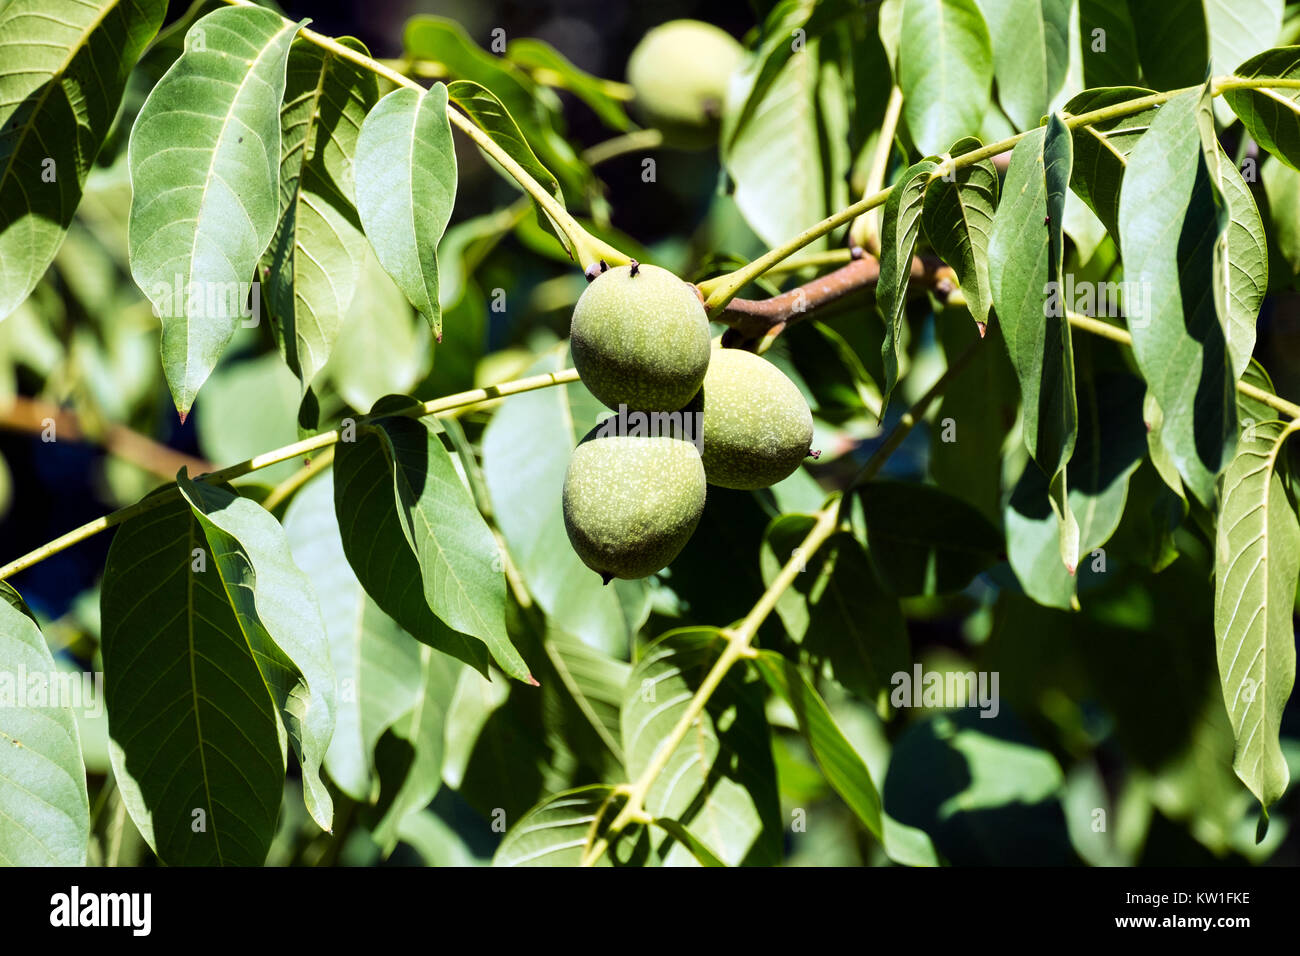 Fruits of a common walnut in a green peel among green foliage (Juglans regia) Stock Photo